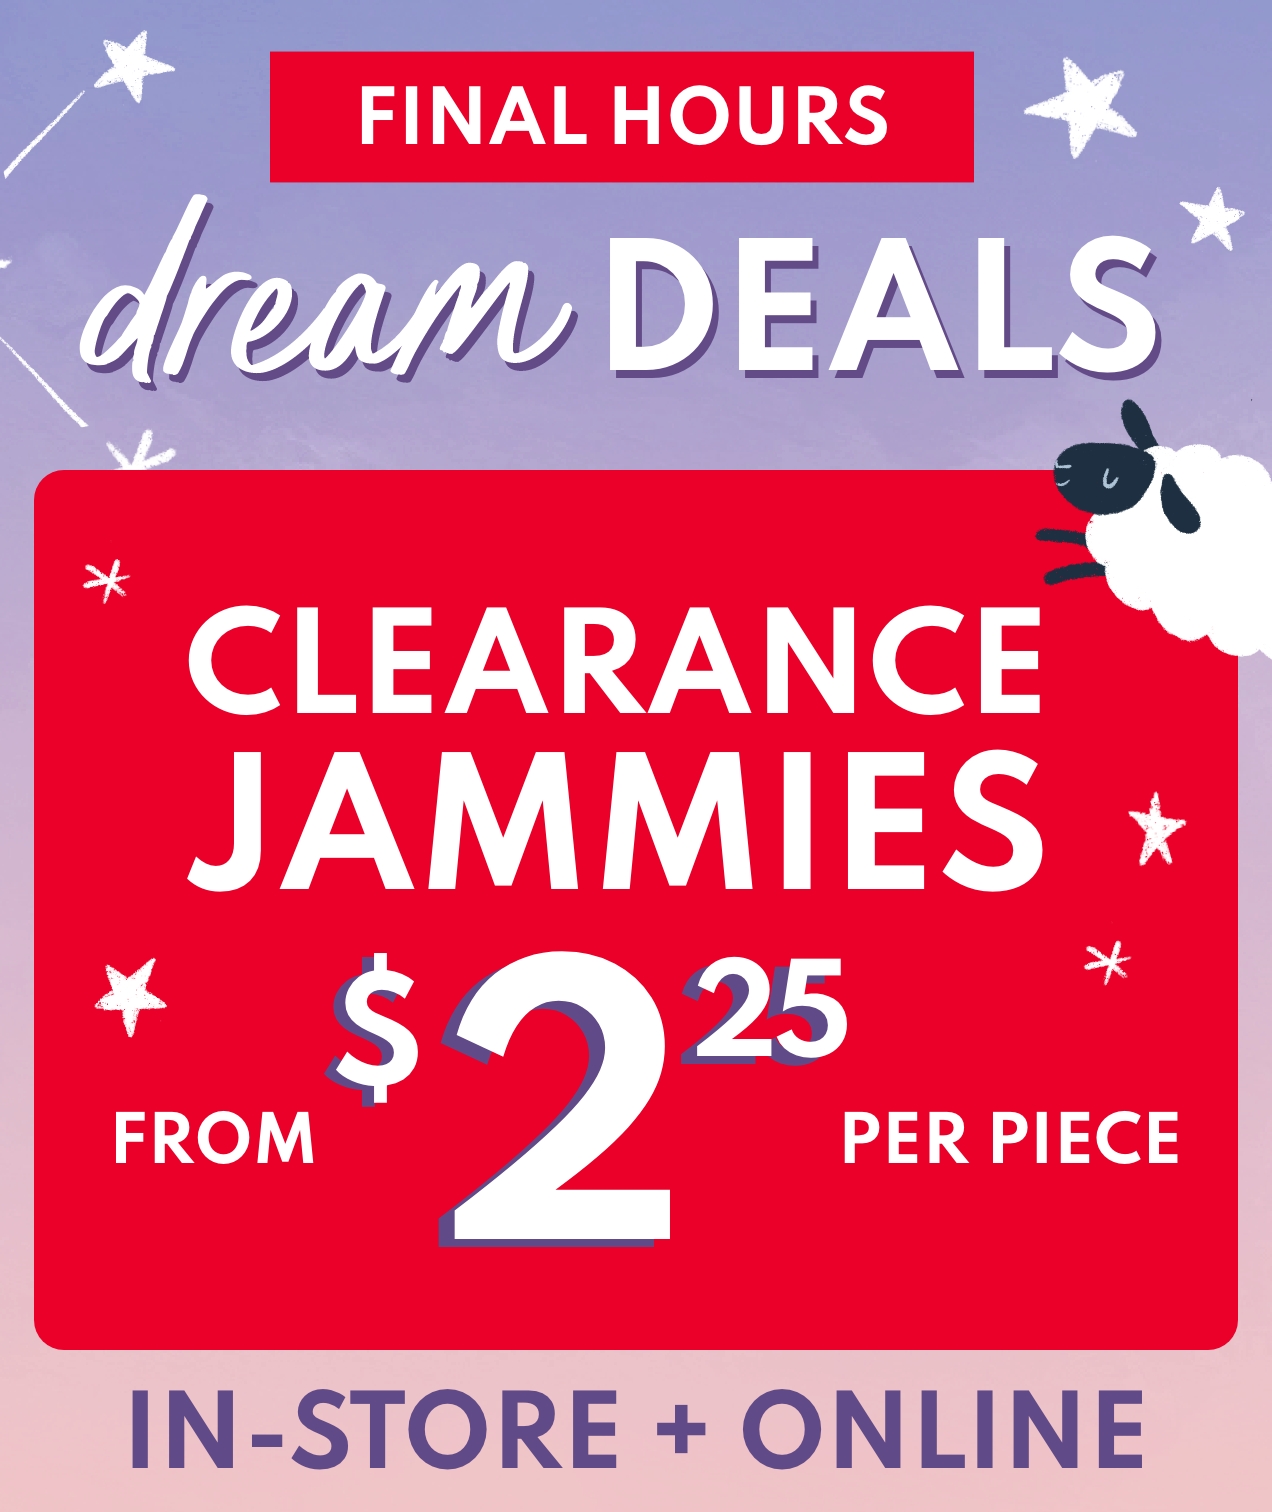 FINAL HOURS | dream DEALS | CLEARANCE JAMMIES | FROM $2.25 PER PIECE